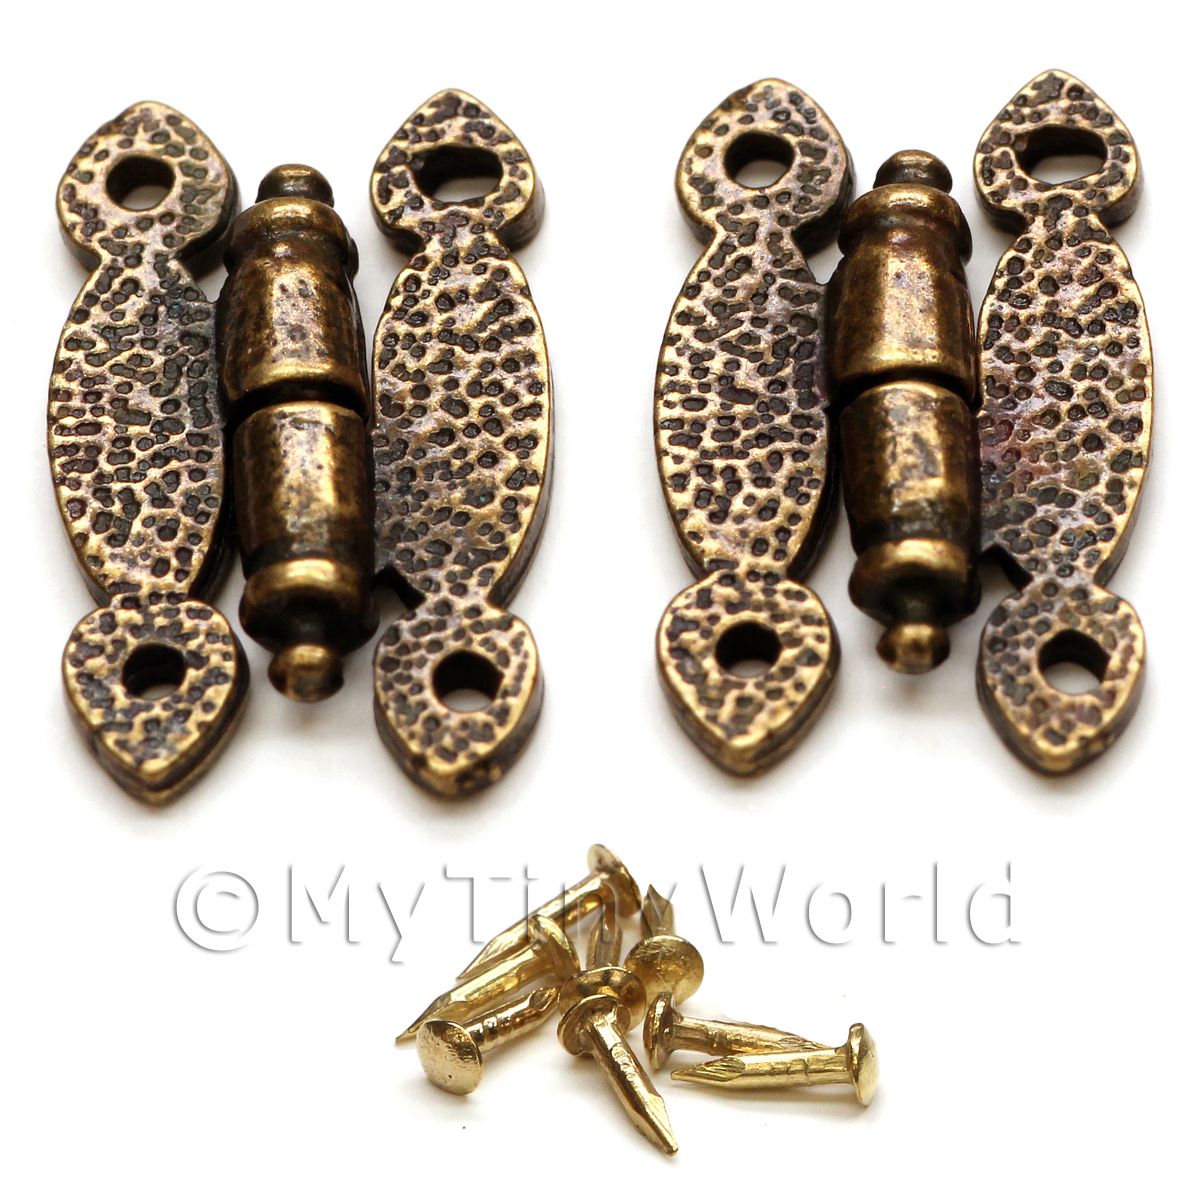 2x Small Dolls House Miniature Ornate Hammered Brass Butterfly Hinges 